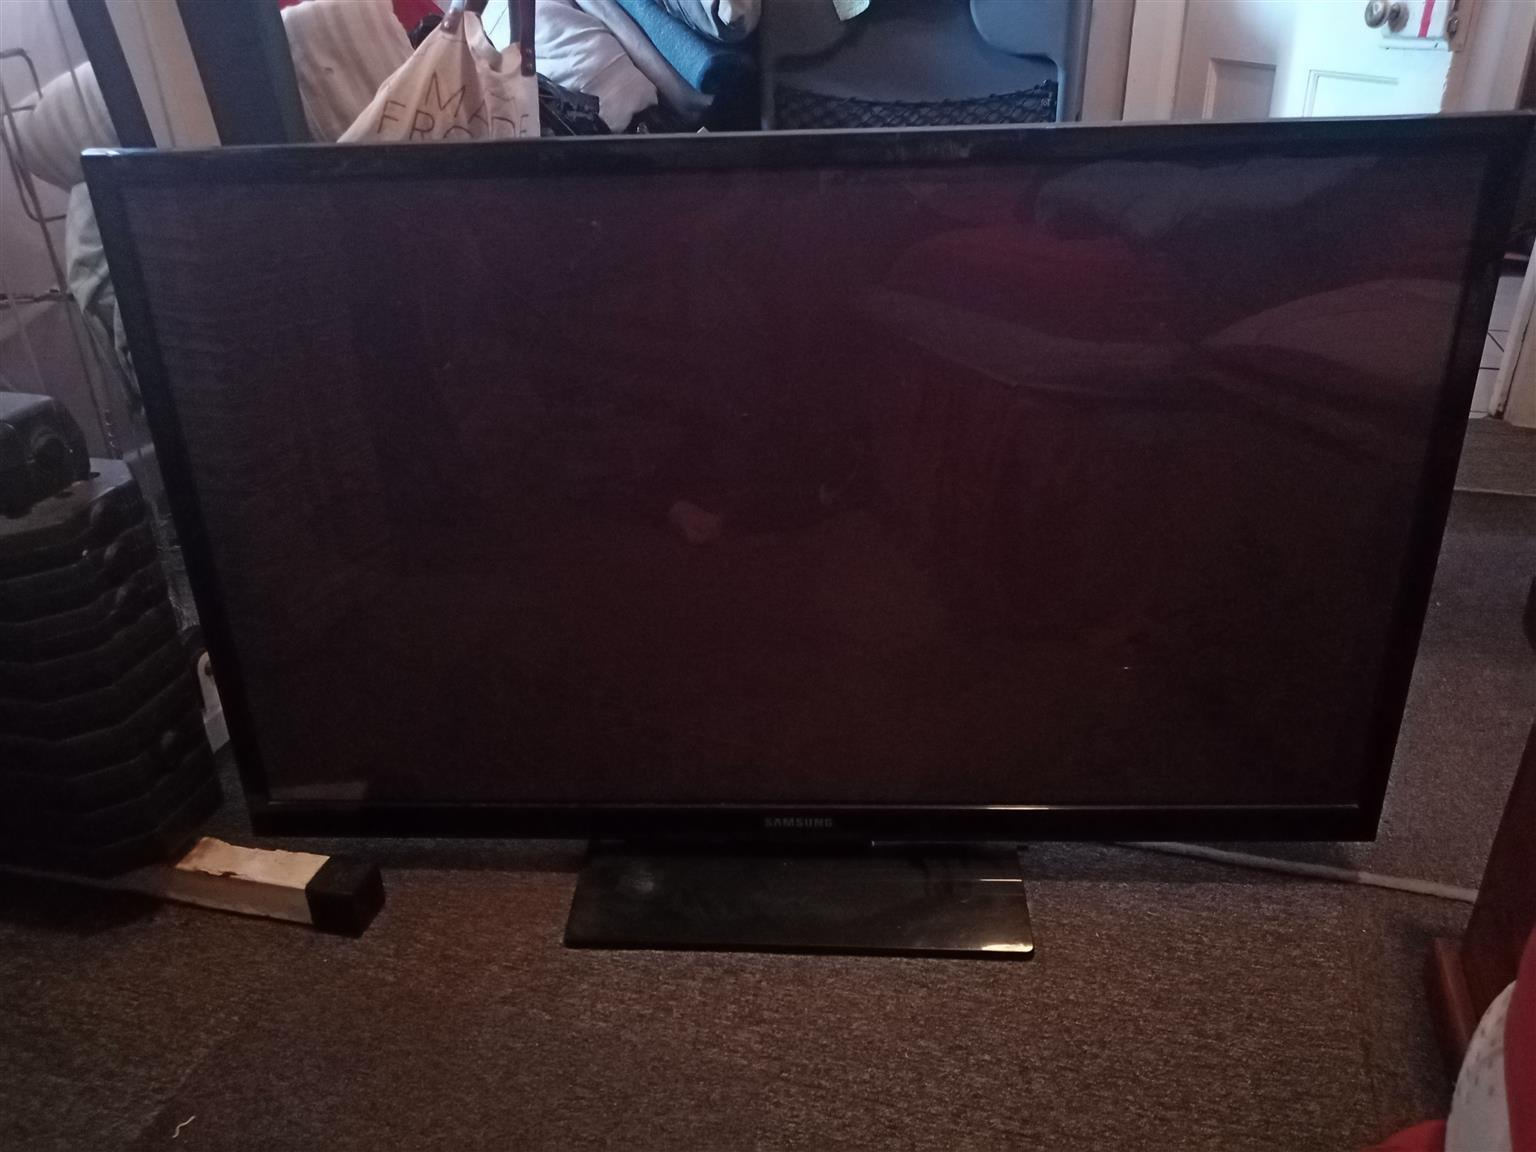 Samsung 50inch plasma tv fornsale screen is cracked 